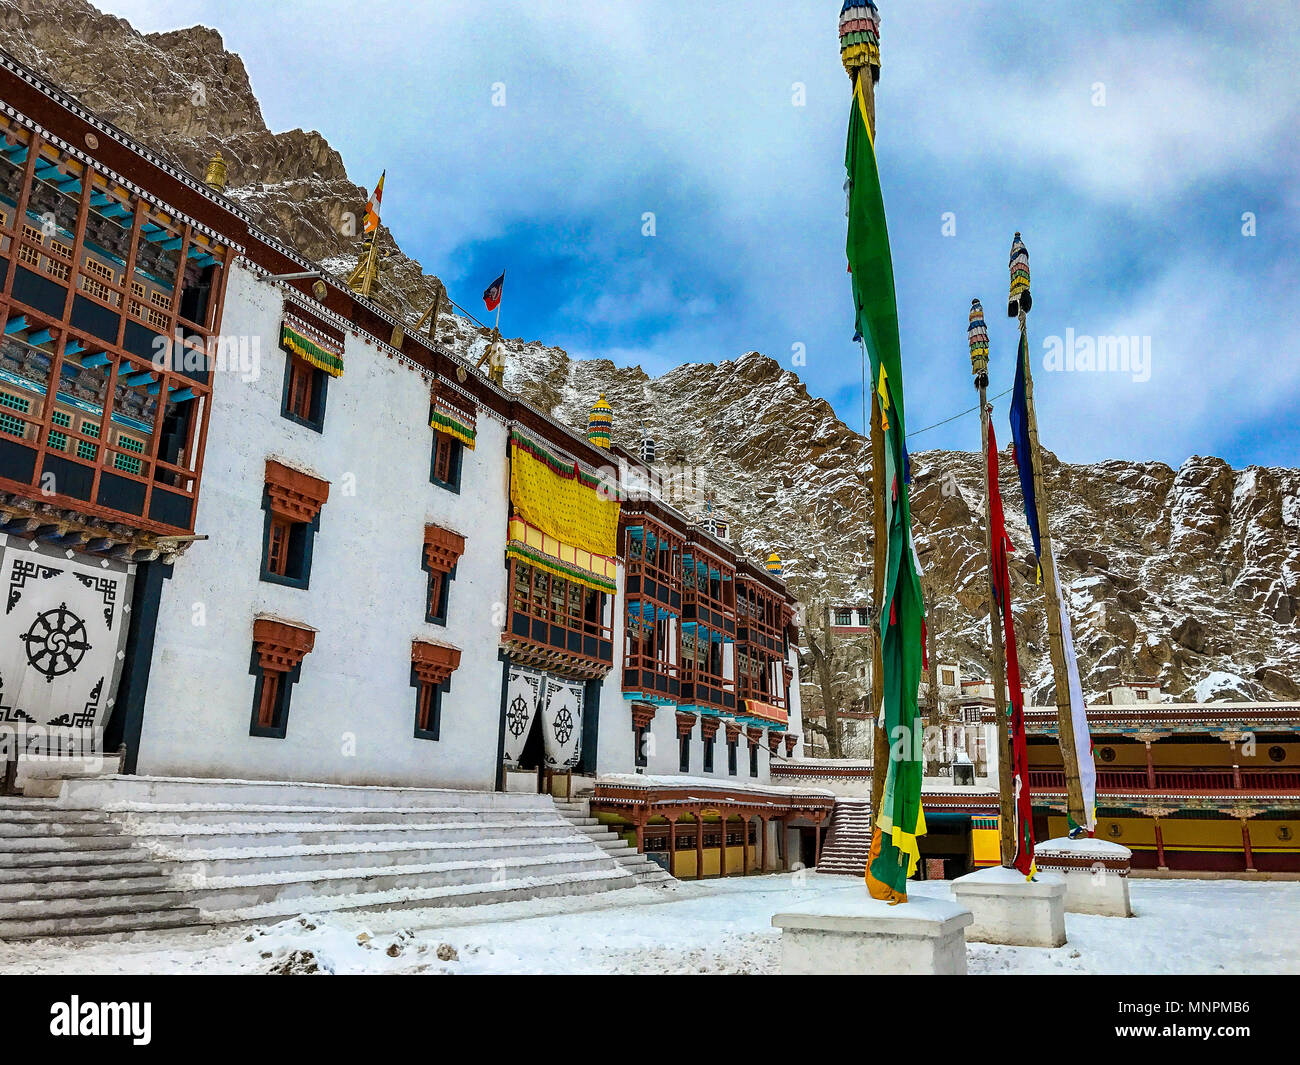 Thiksey Monastery is an imposing religious edifice, which earns recognition as one of the most spectacular Buddhist shrines of Ladakh, India. Stock Photo